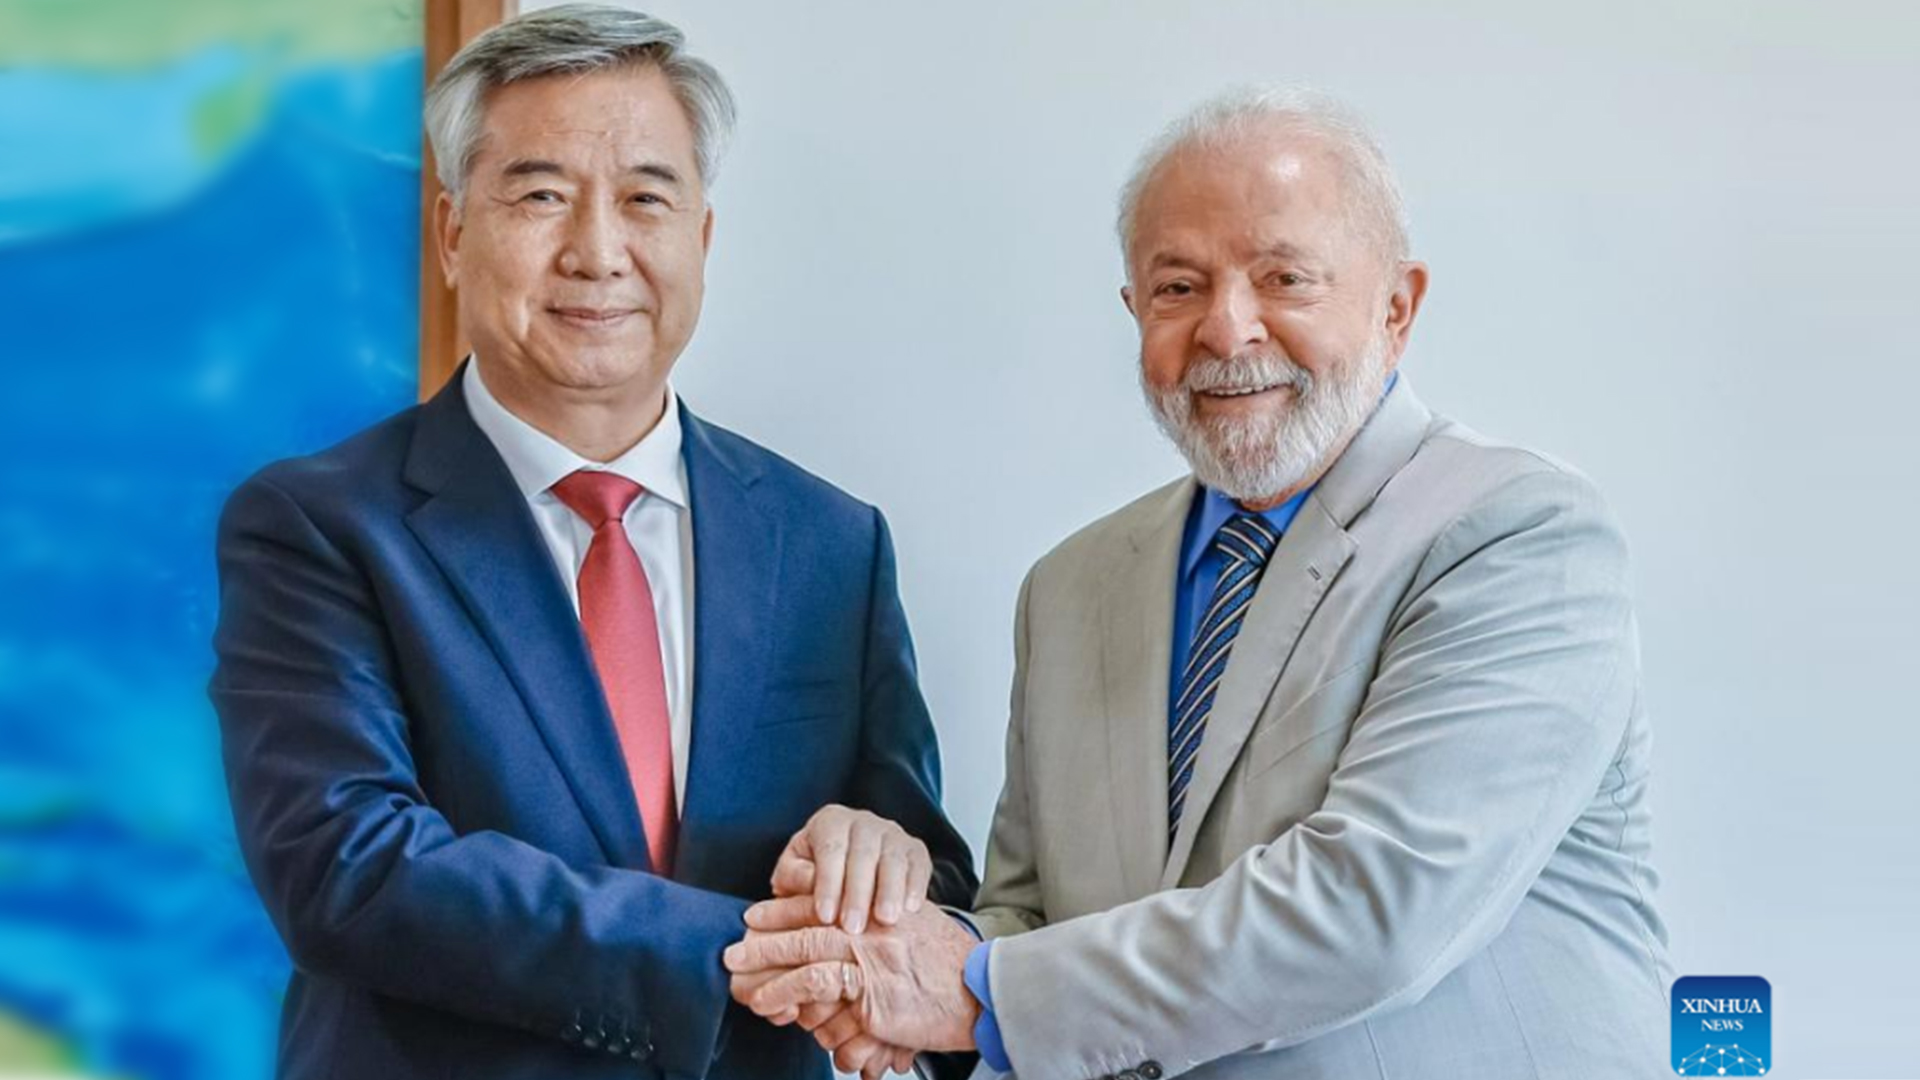 Li Xi, a member of the Standing Committee of the Political Bureau of the Communist Party of China (CPC) Central Committee and secretary of the CPC Central Commission for Discipline Inspection, meets with Brazilian President Luiz Inacio Lula da Silva in Brasilia, Brazil, September 22, 2023. /Xinhua